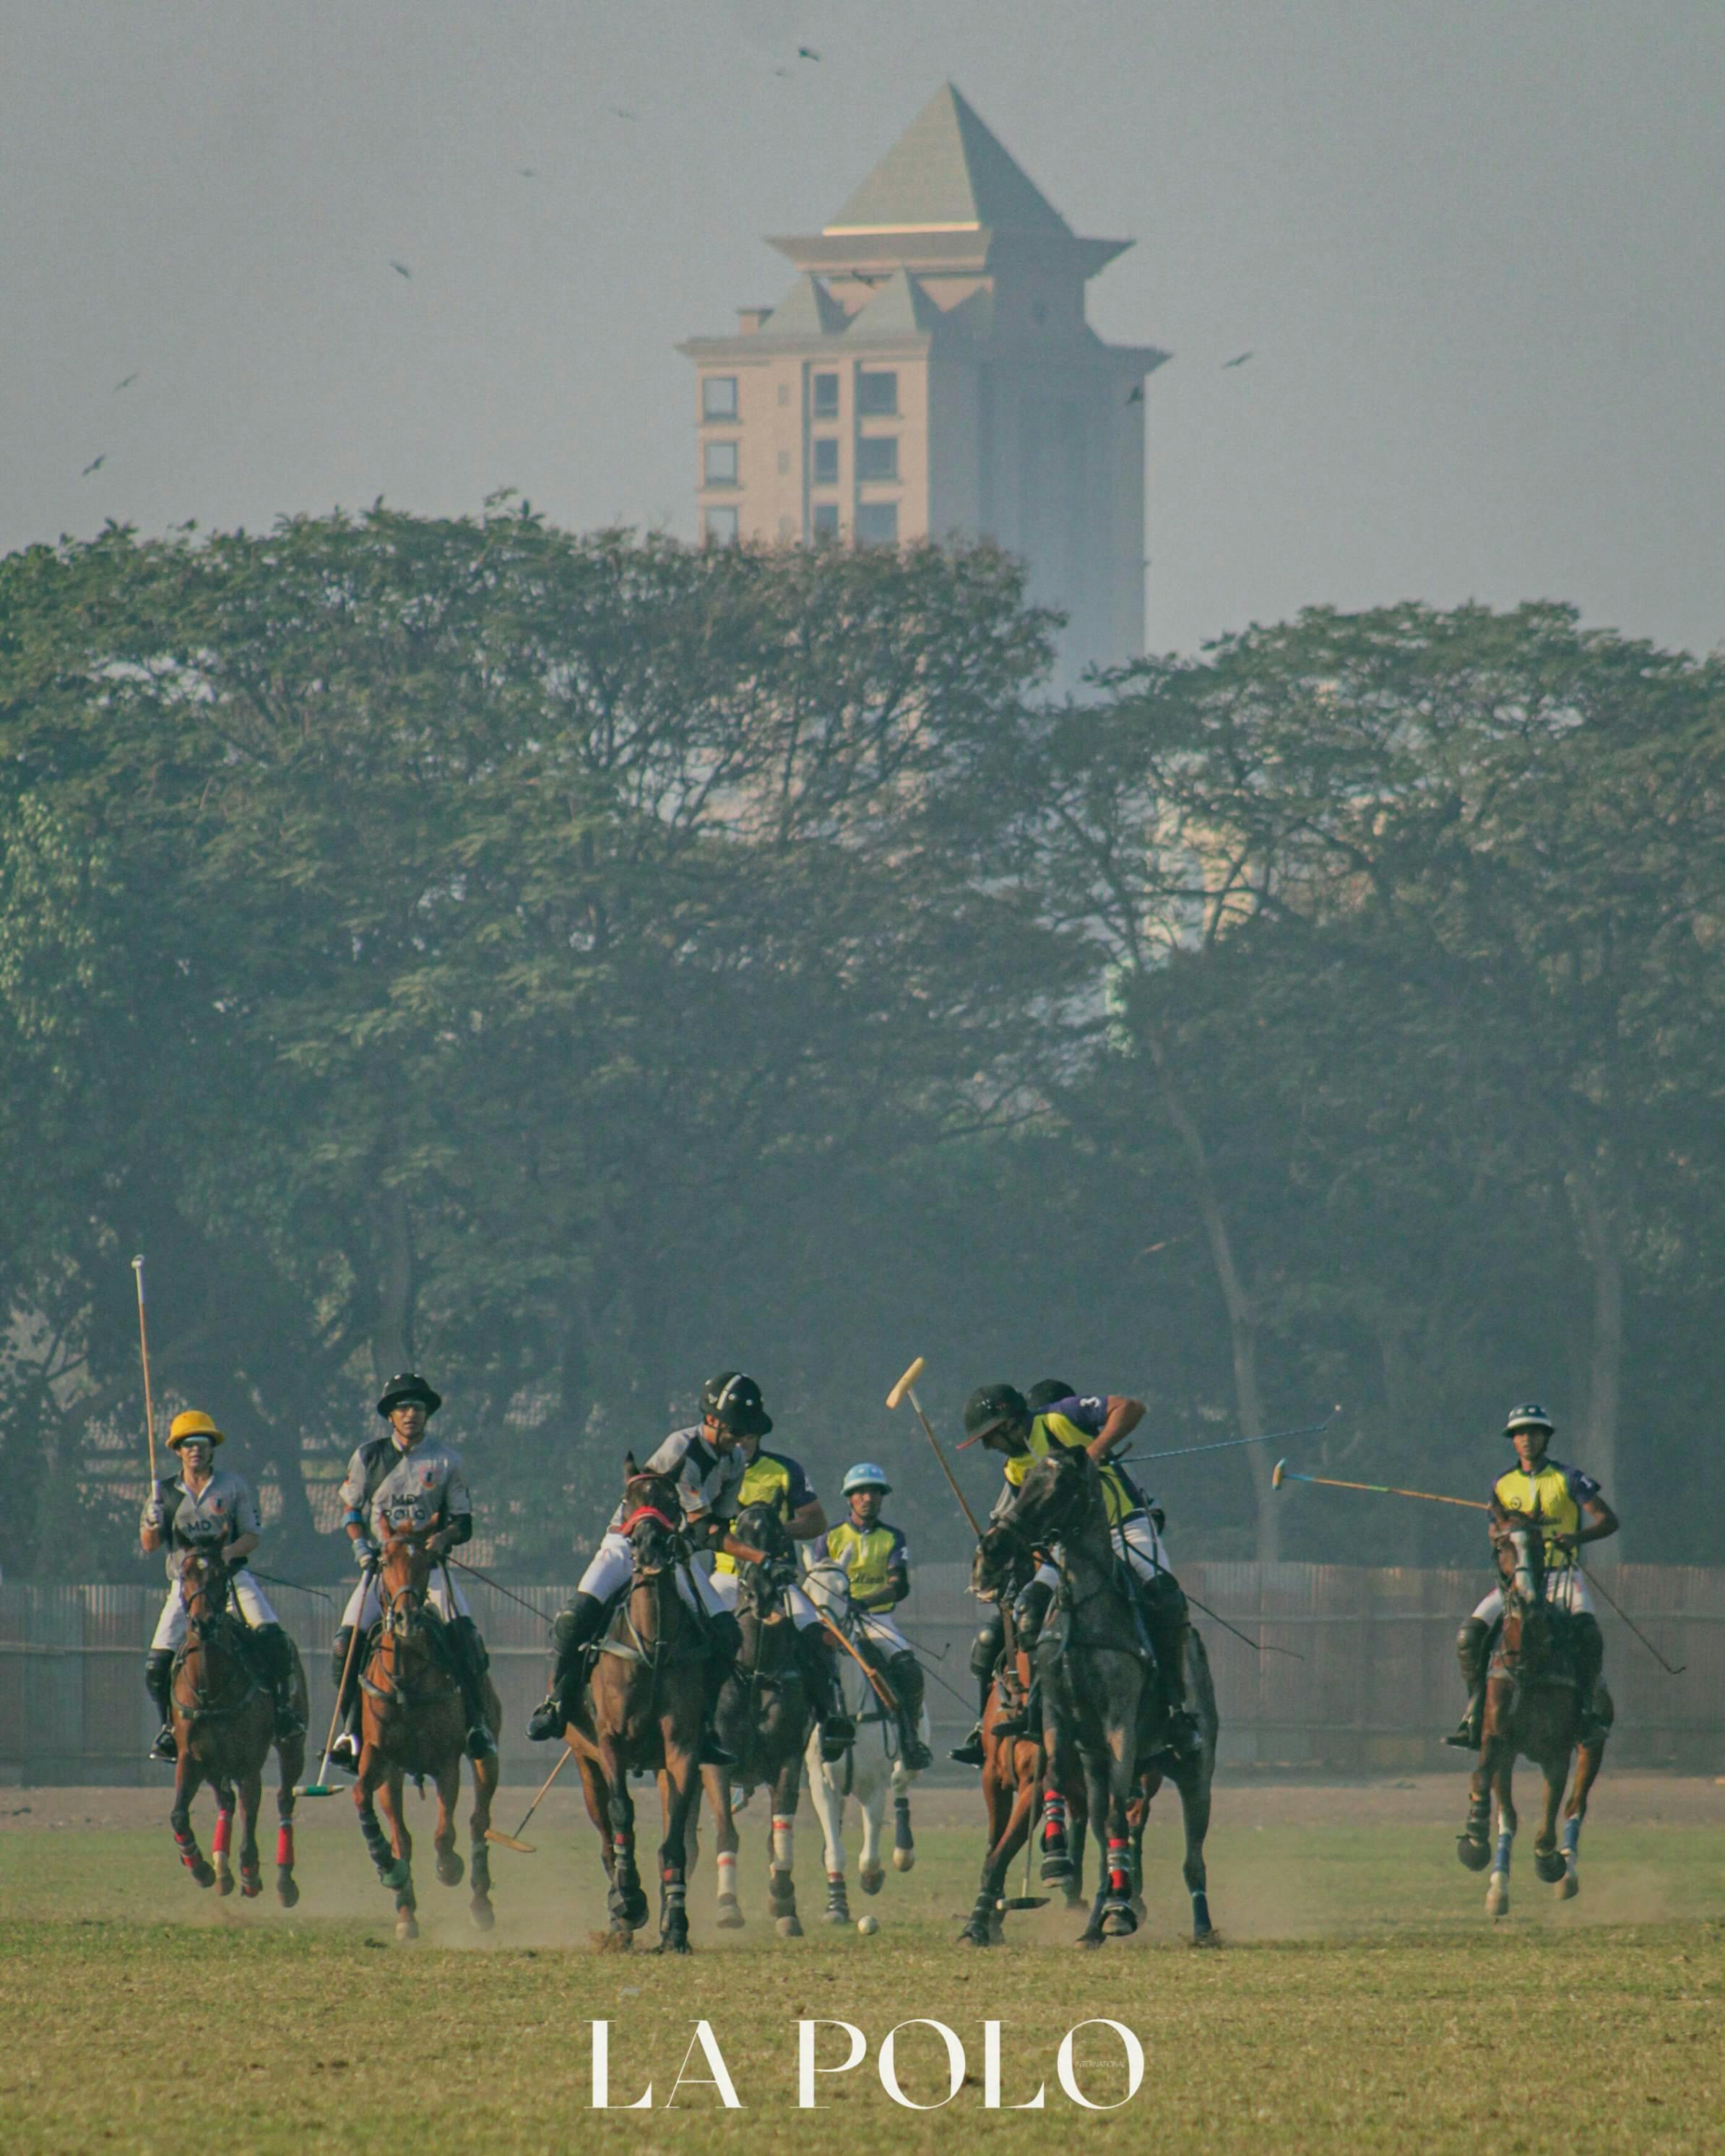 The teamwork and coordination displayed by polo players on the field is a sight to behold.